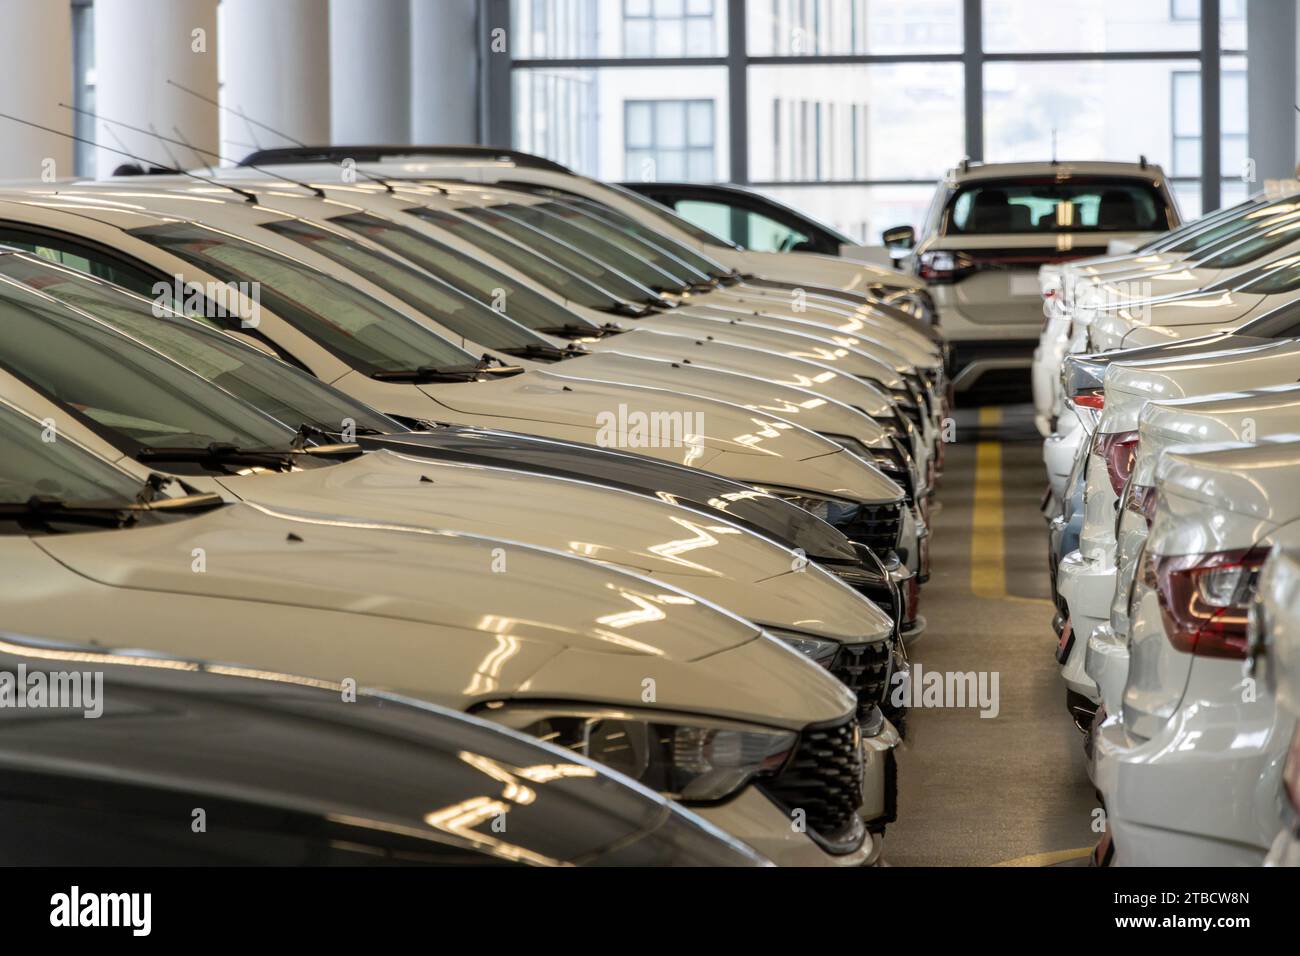 Used car sales Cars in a row Car Dealer Inventory Indoor garage Stock Photo